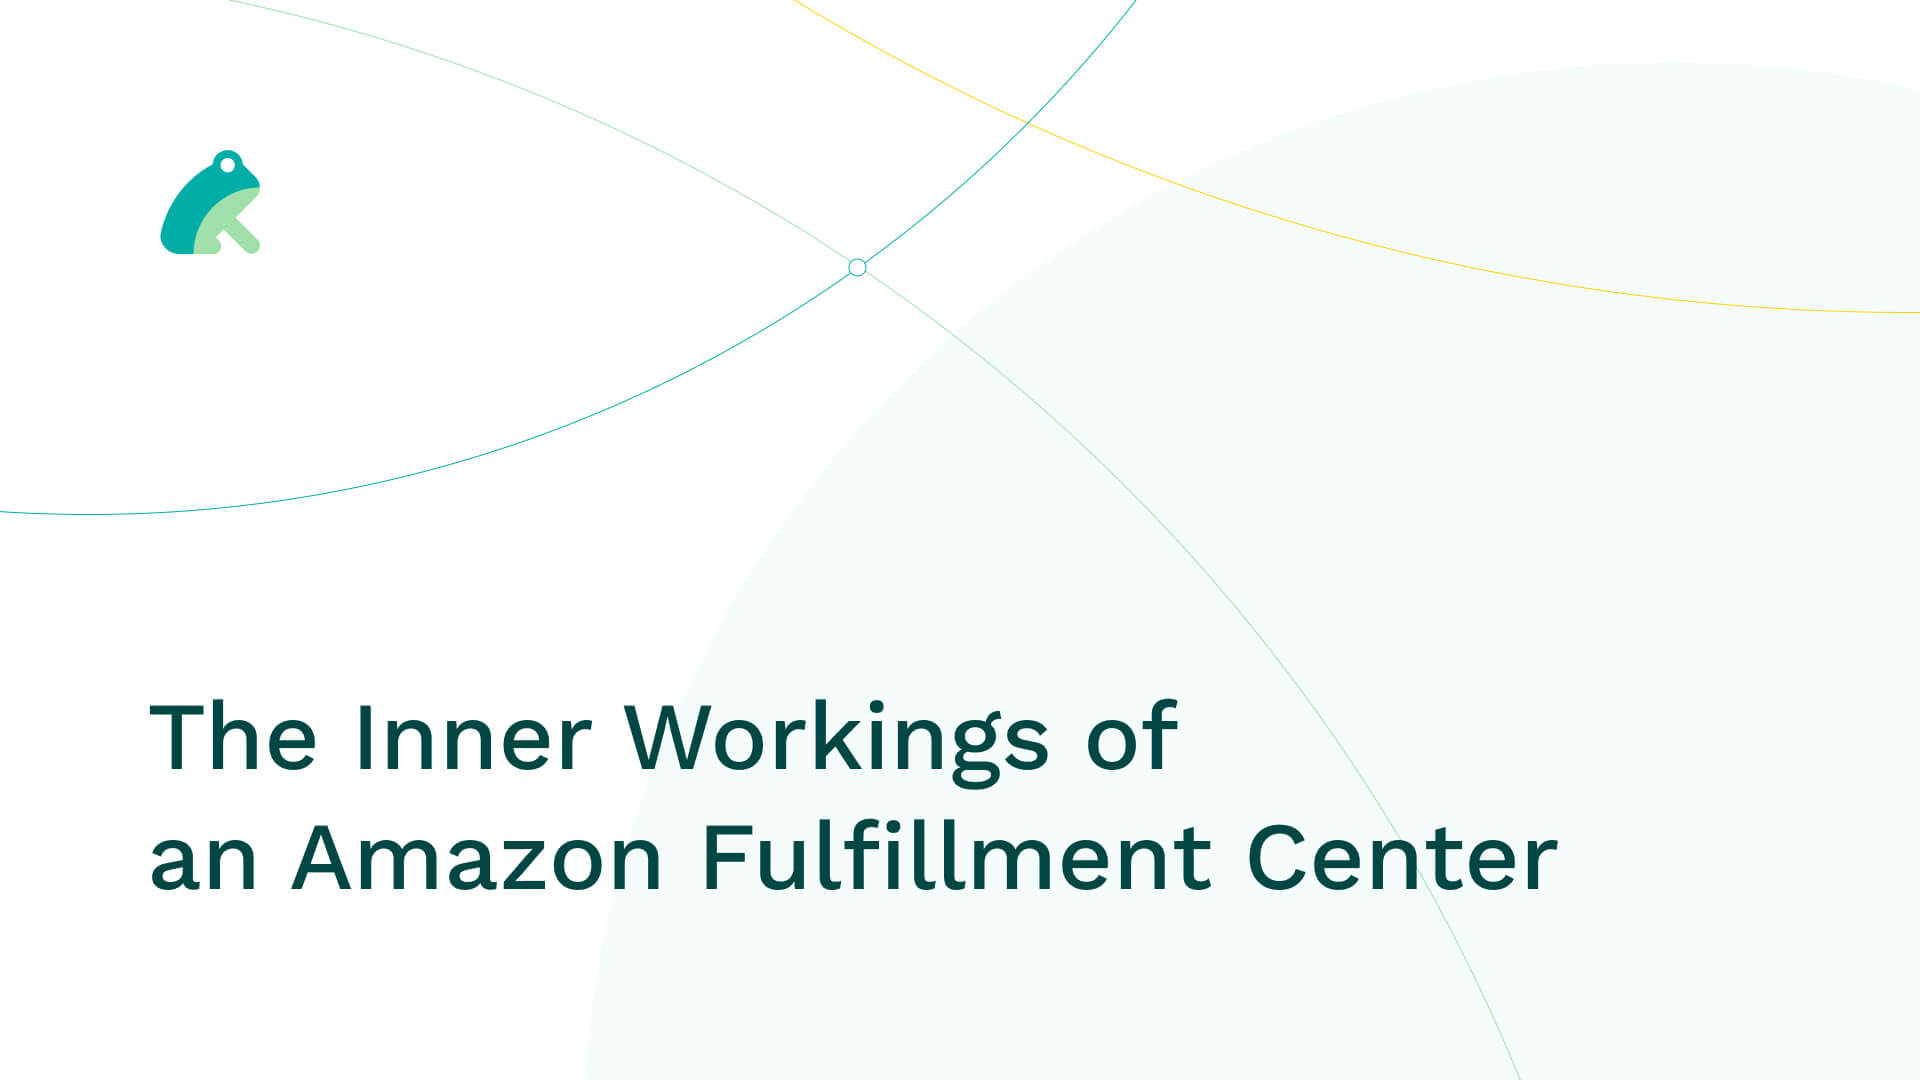 The Inner Workings of an Amazon Fulfillment Center